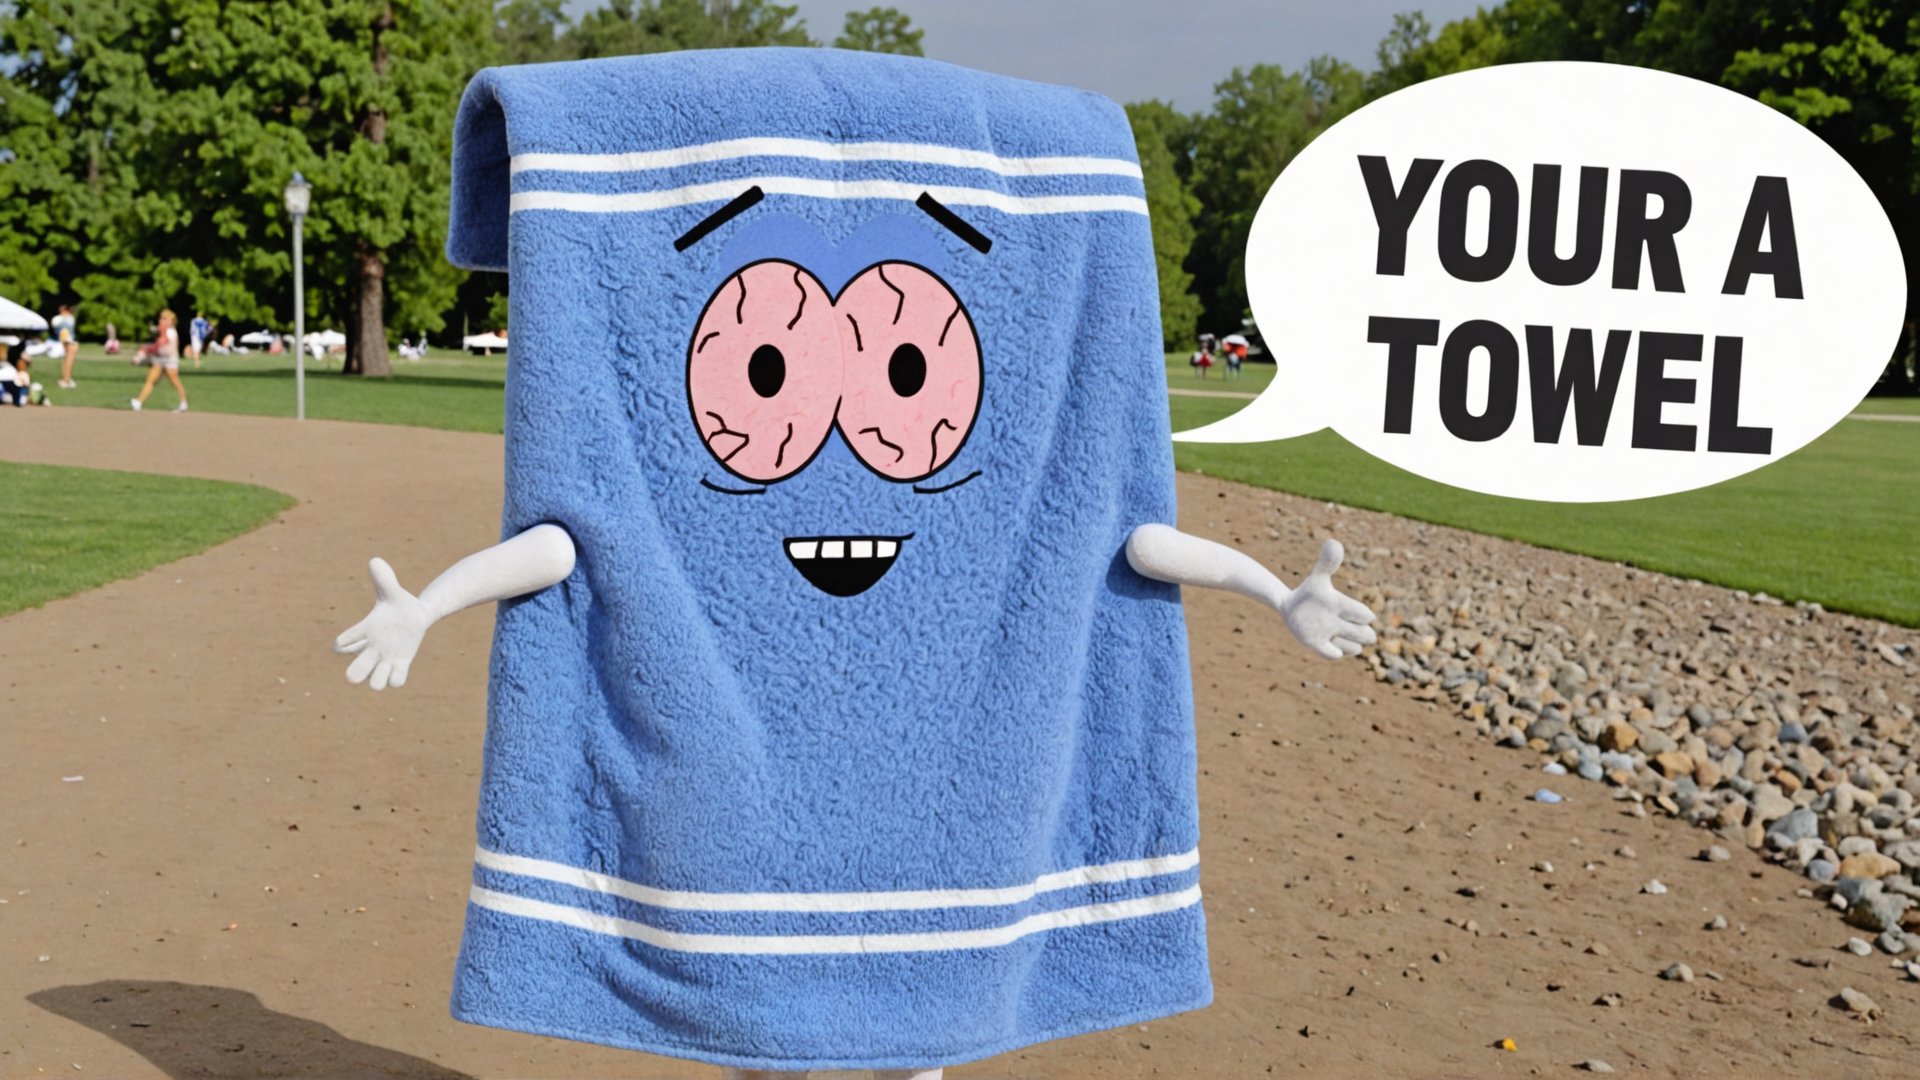 Photo of Towelie at the park with a text bubble that says "your a towel" <lora:Towelie_v420:0.8>